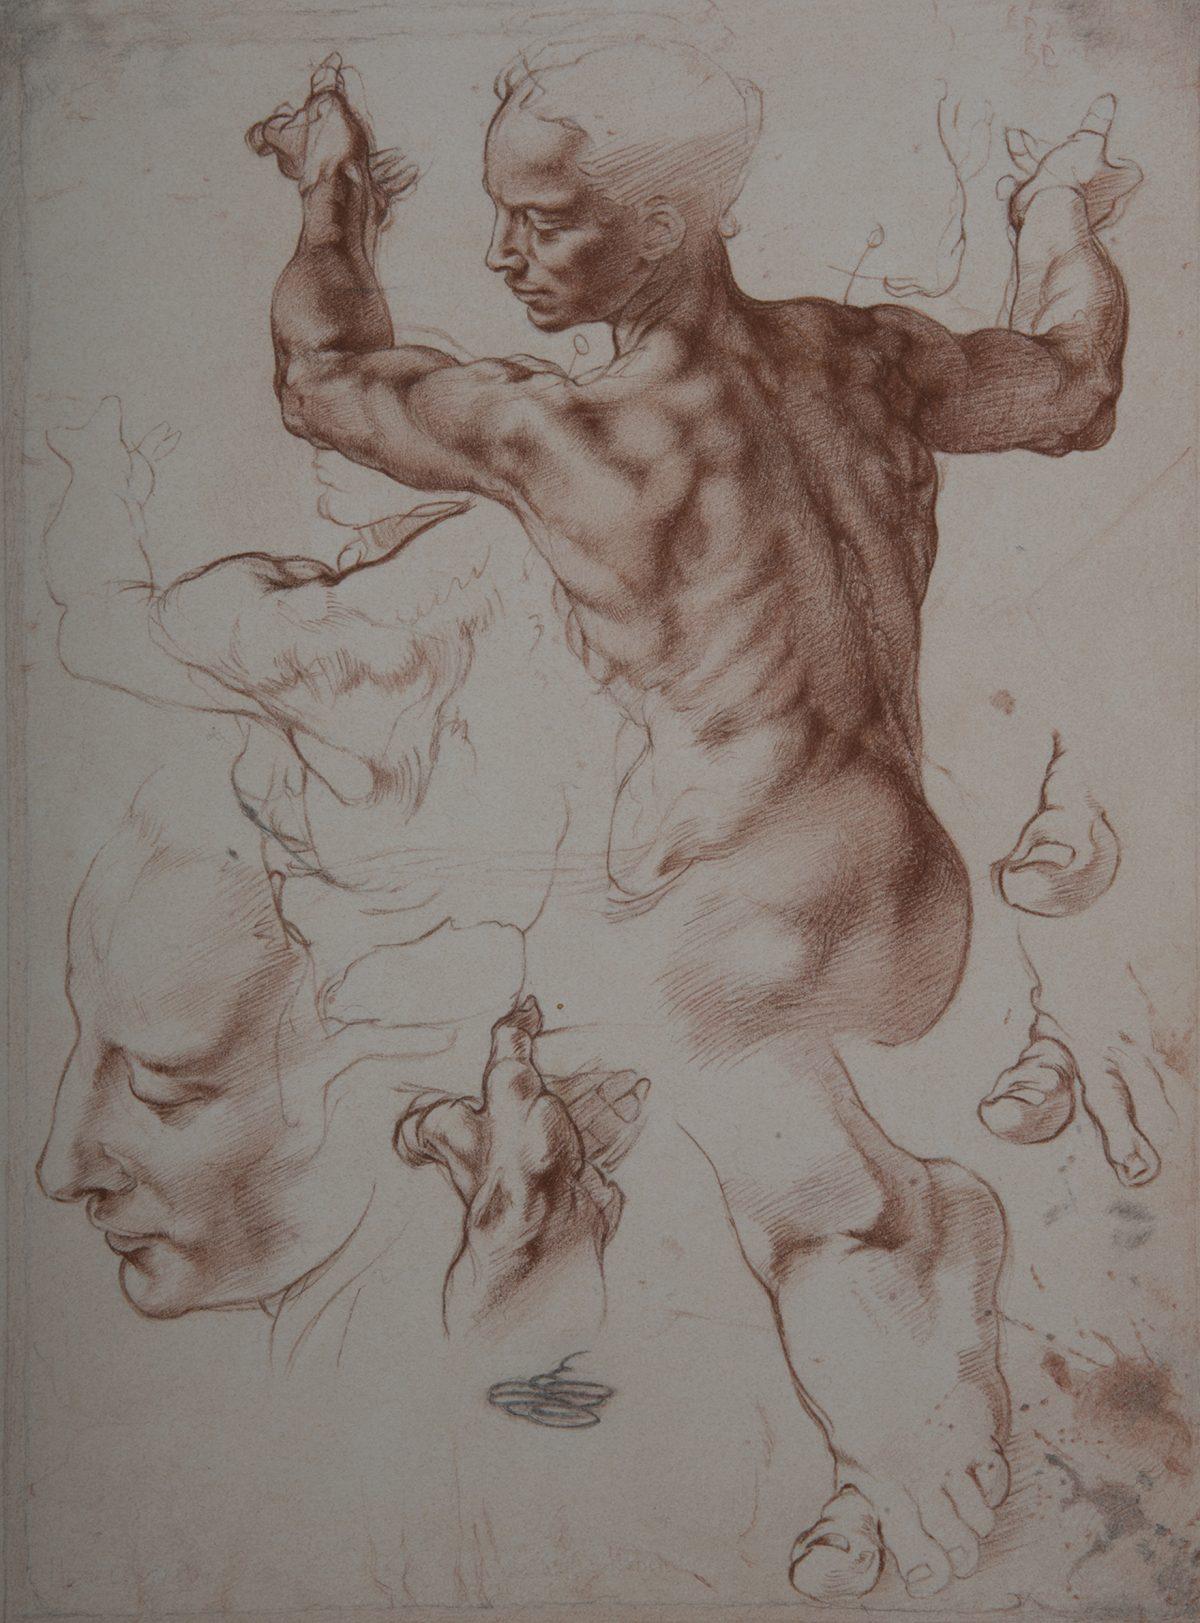  Drawing, 2018 (after Michelangelo Buonarroti (1475–1564) “Studies for the Libyan Sibyl,” circa 1510–1511) by Carlos Madrid. Sanguine on prepared paper, 11 3/8 inches by 8 7/16 inches. (Robert Essel)